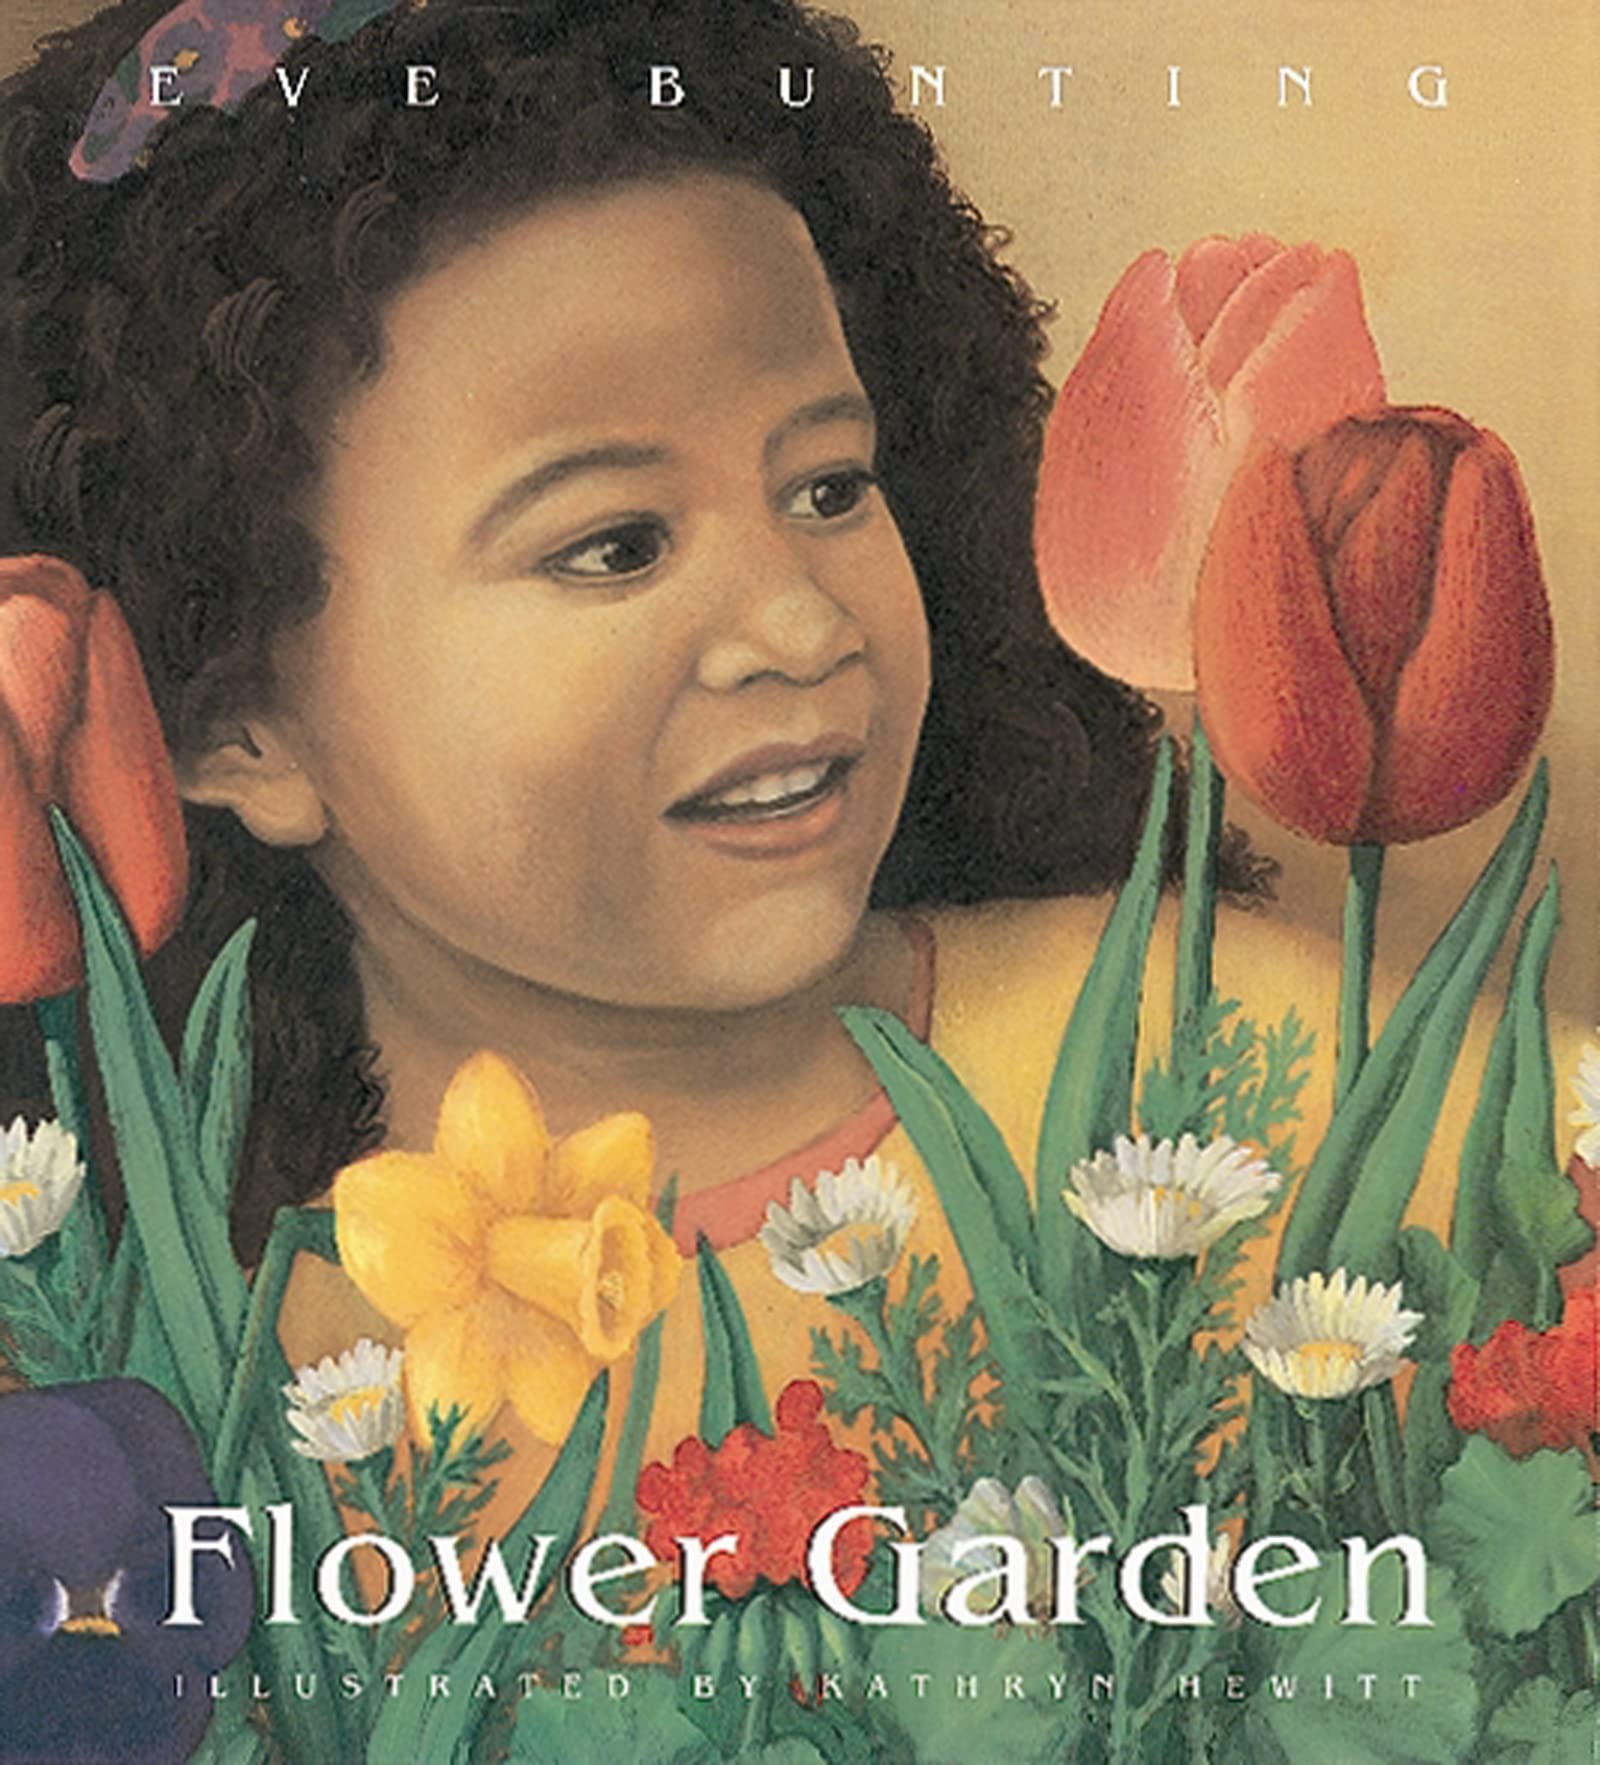 speech and language teaching concepts for Flower Garden in speech therapy